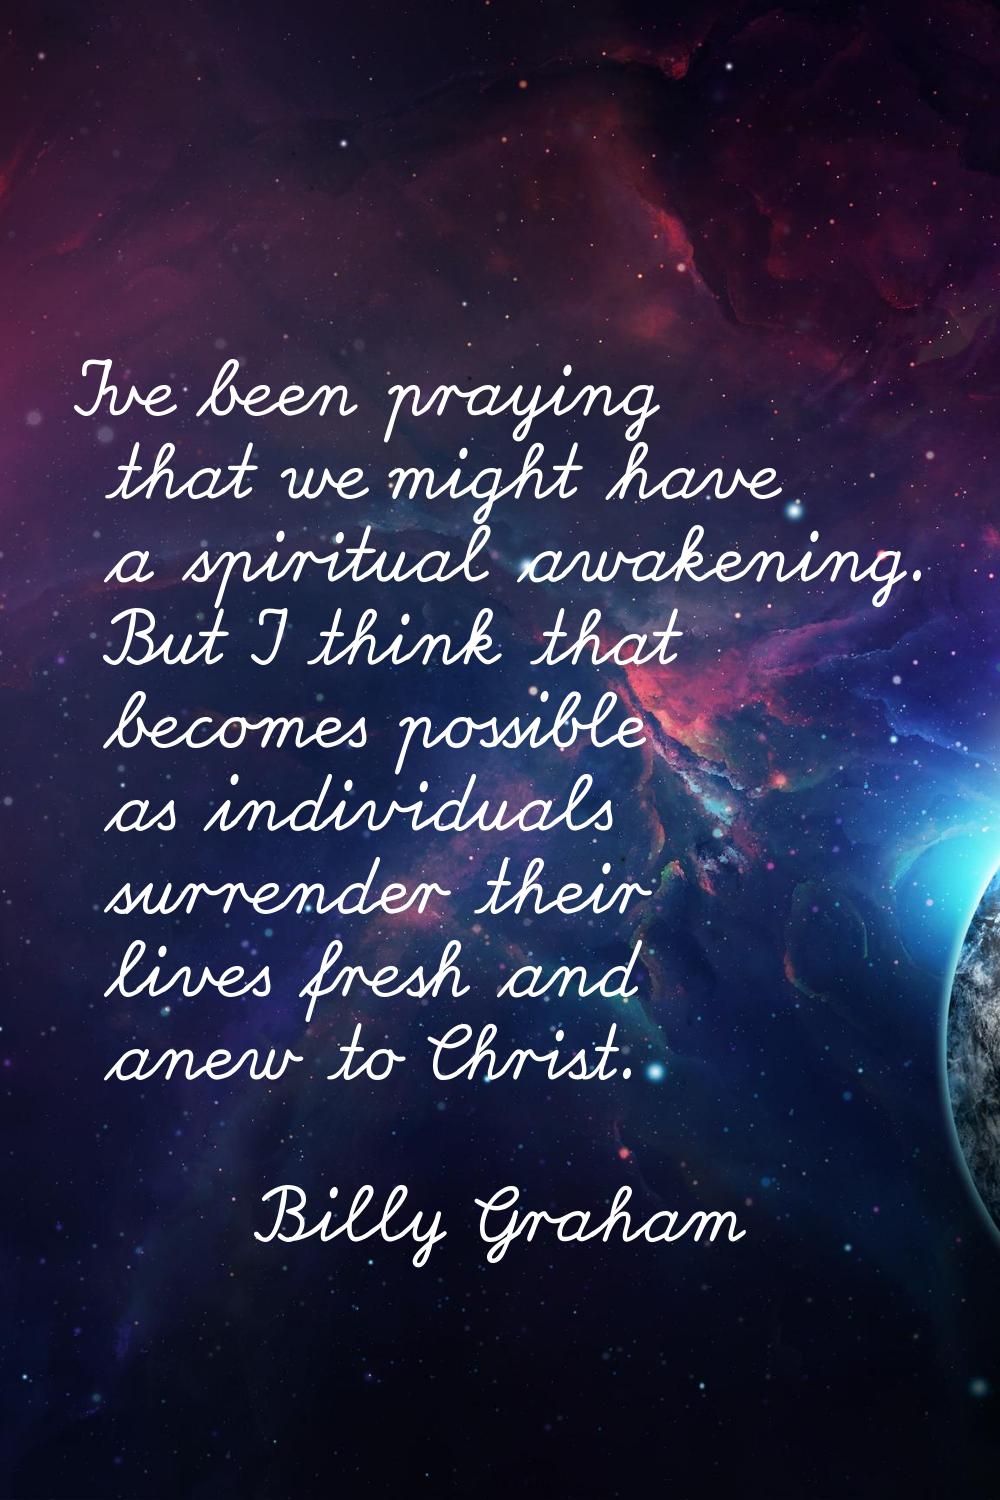 I've been praying that we might have a spiritual awakening. But I think that becomes possible as in